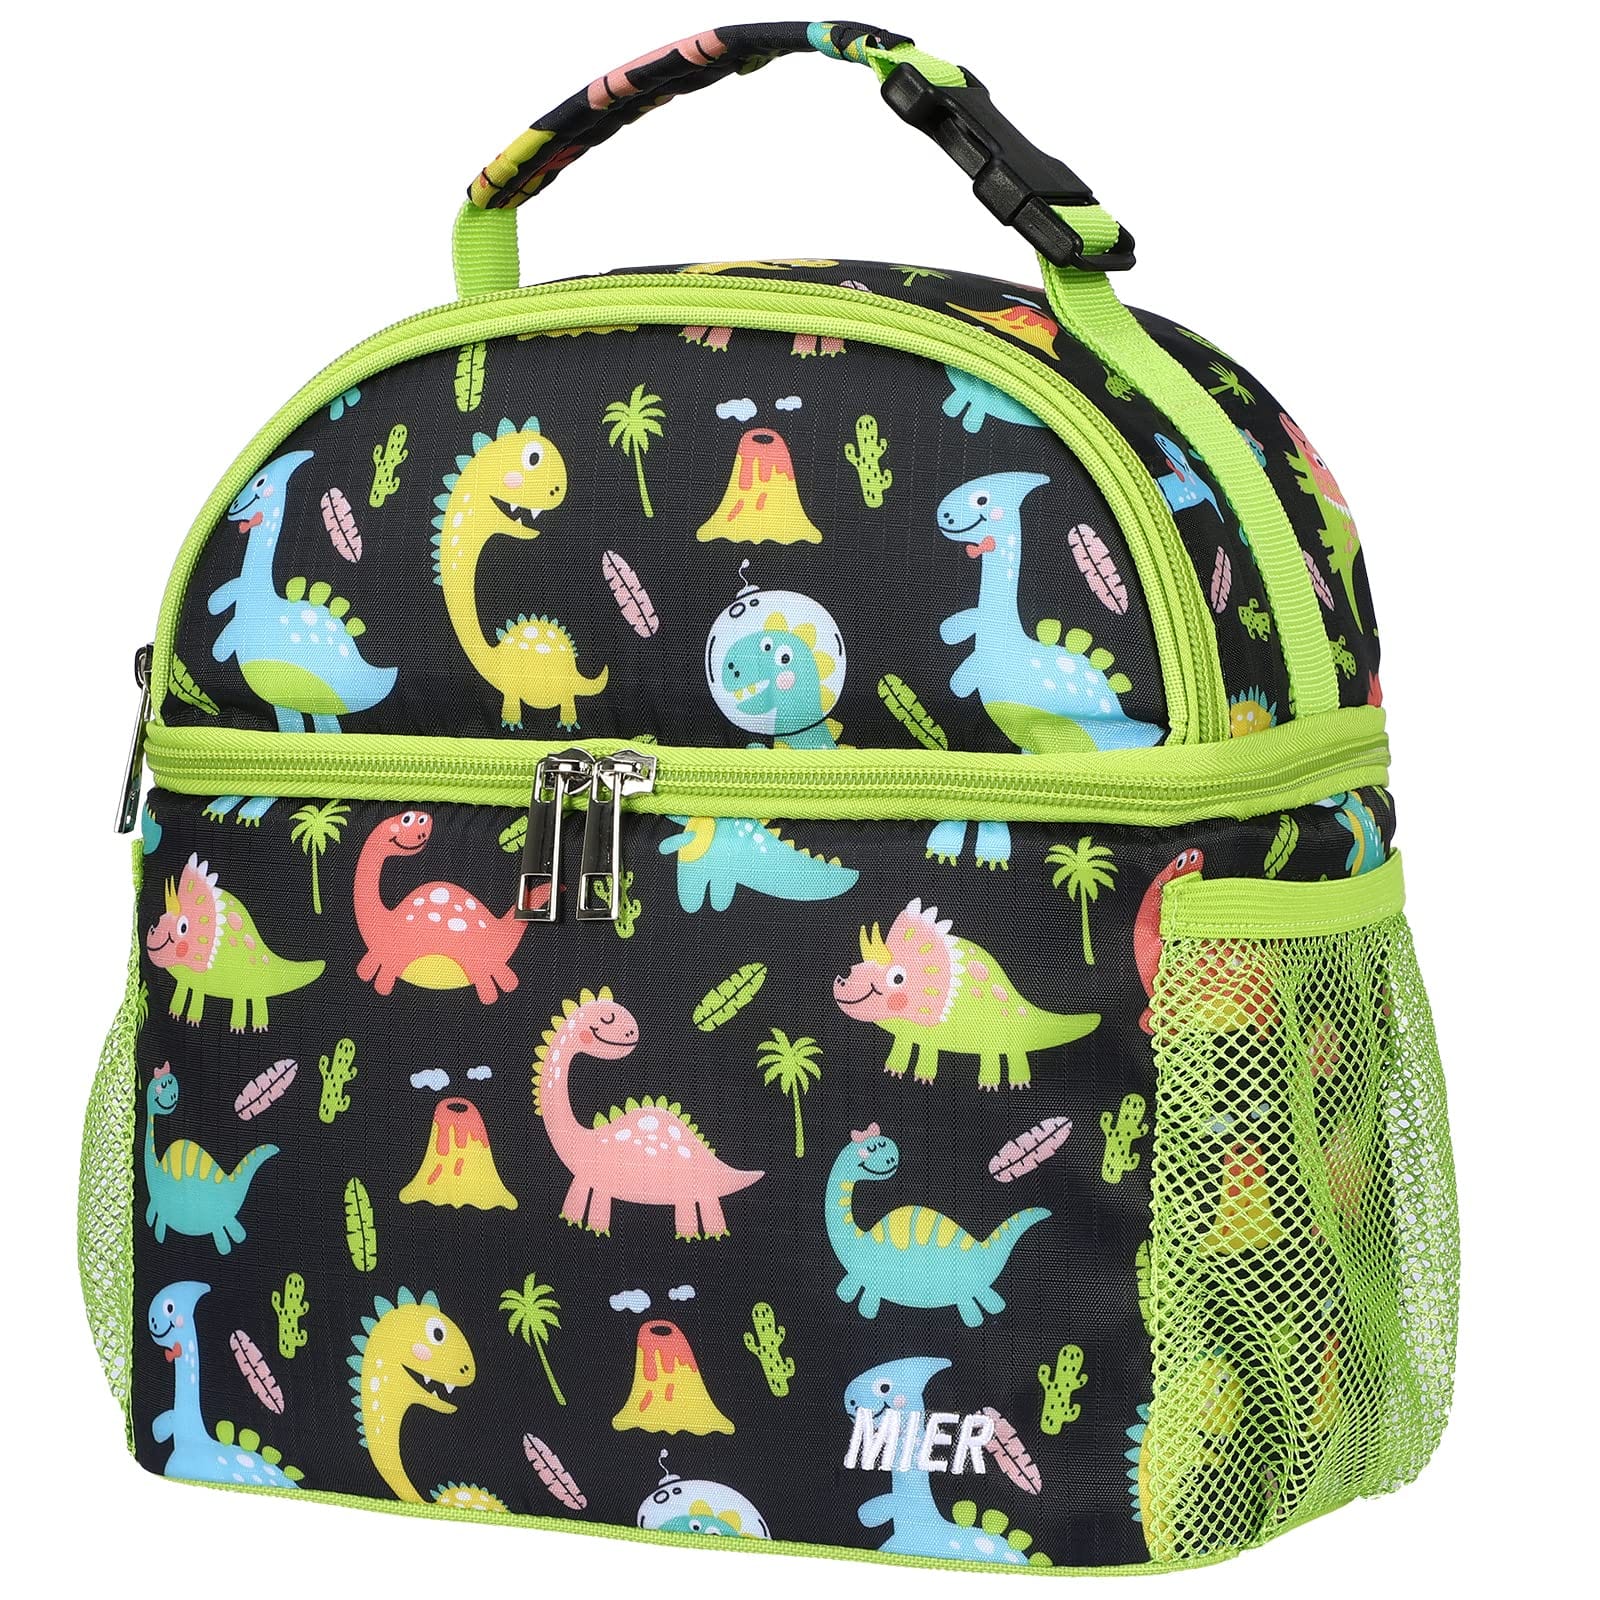  Alligator Crocodile Green Lunch Bags for Boys Girls Insulated  Small Cooler Lunch Box Toddler Lunchbox School Office Women Tote Lunchbags:  Home & Kitchen